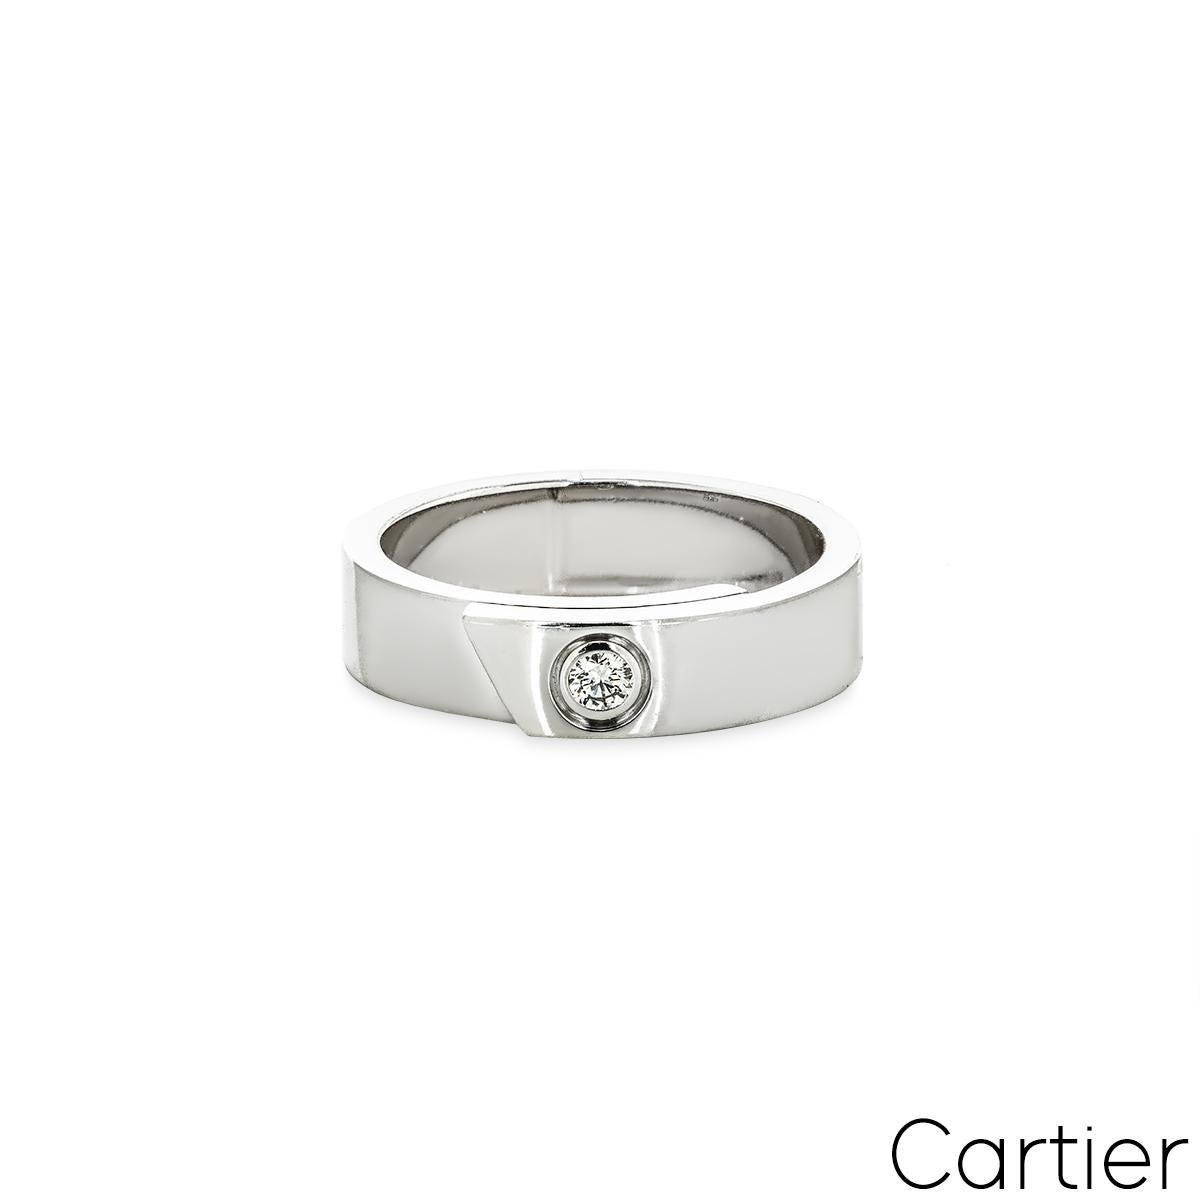 Round Cut Cartier White Gold Diamond Anniversary Ring Size 60 For Sale